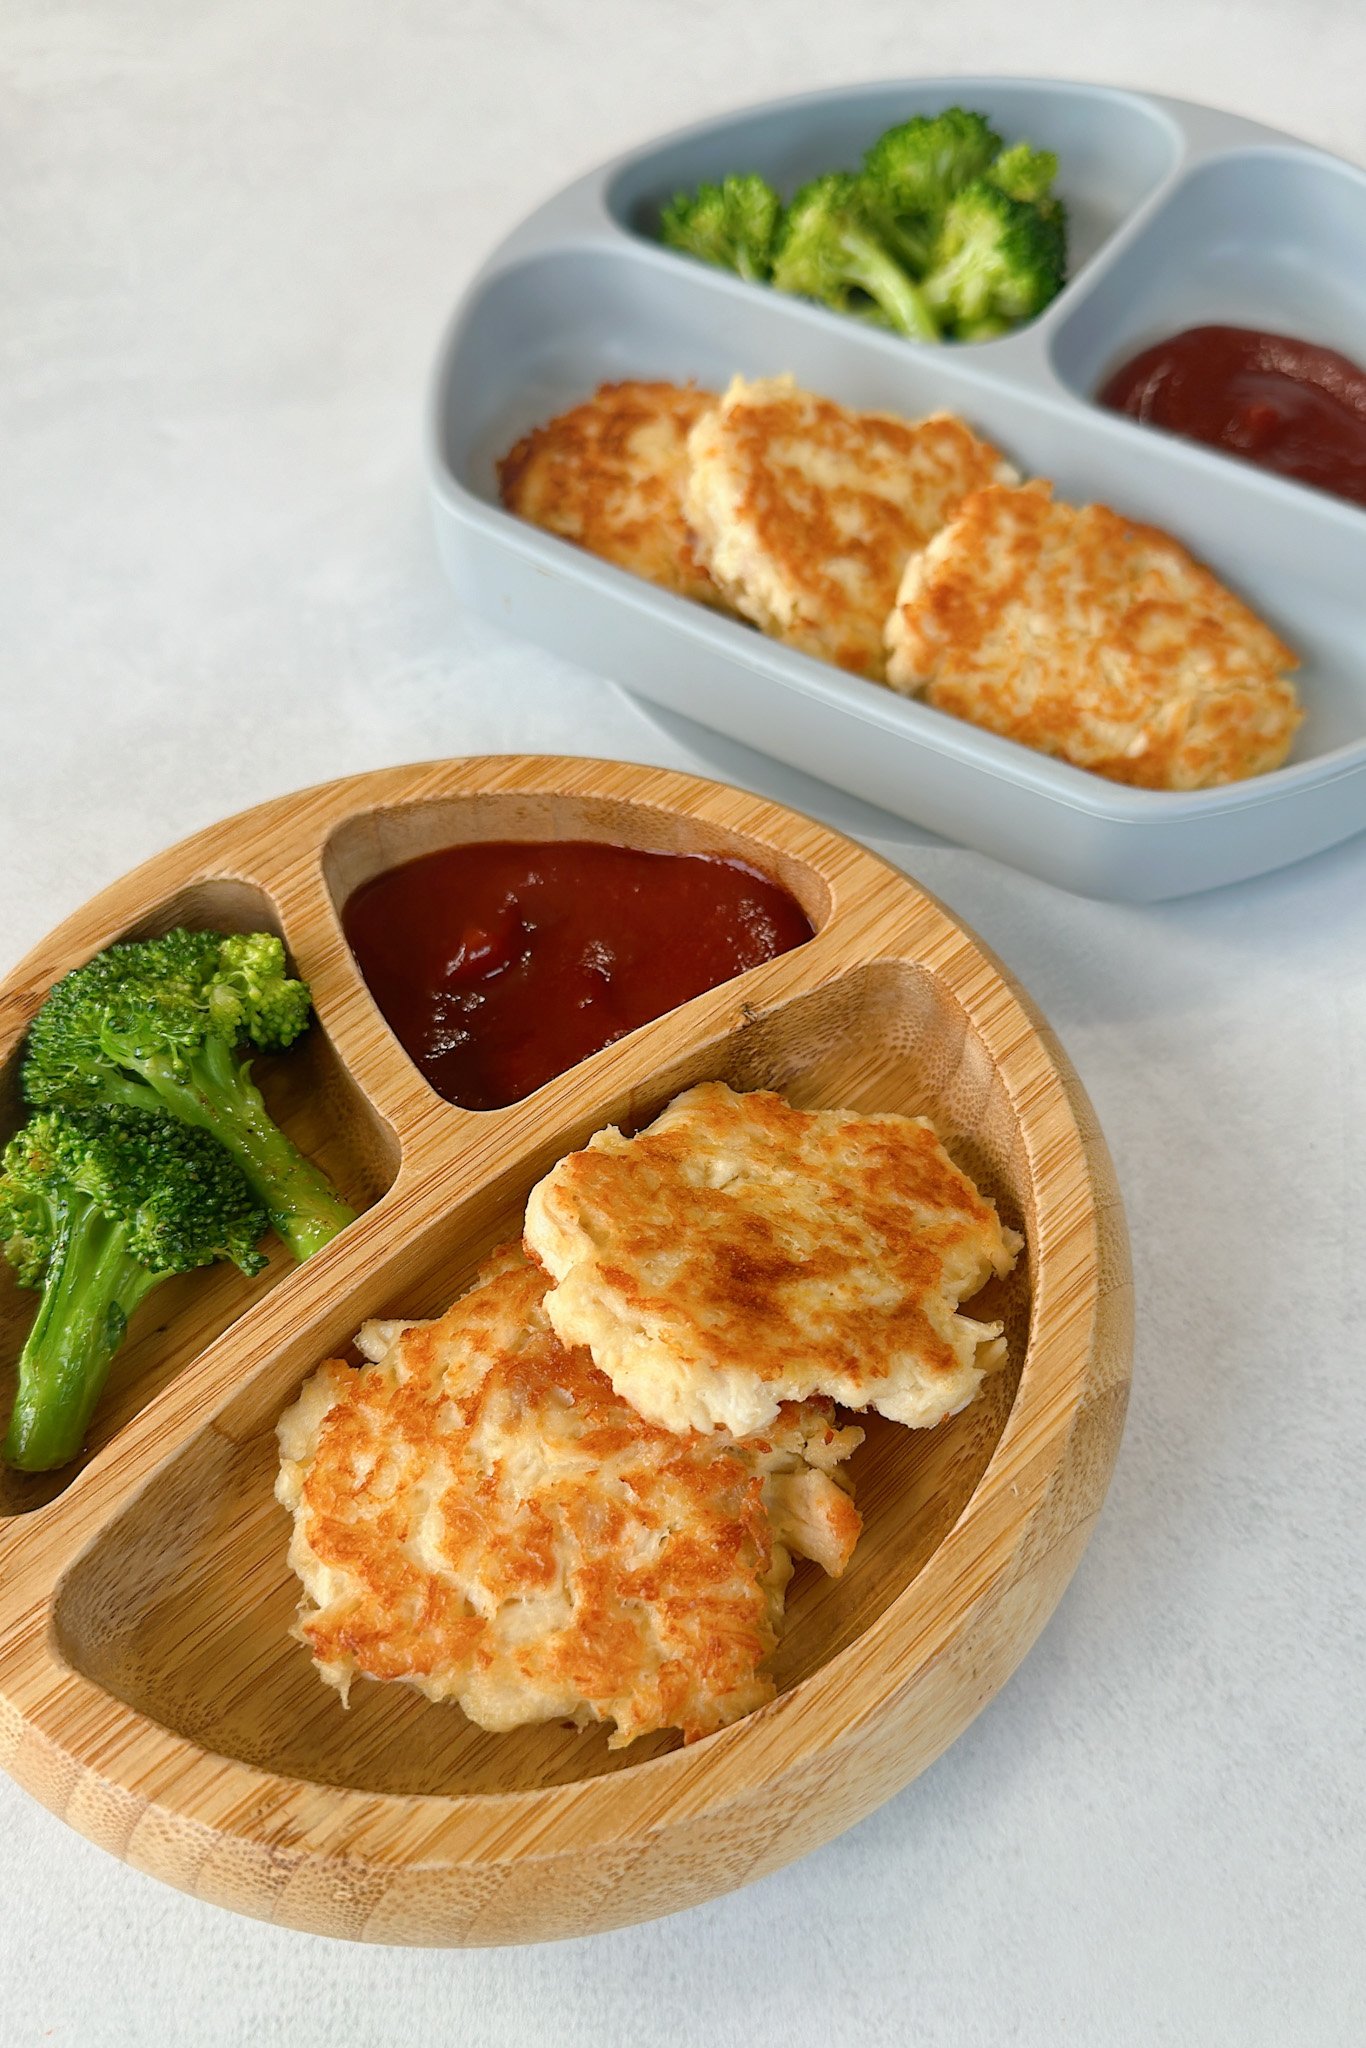 Chicken fritters served with broccoli and ketchup.